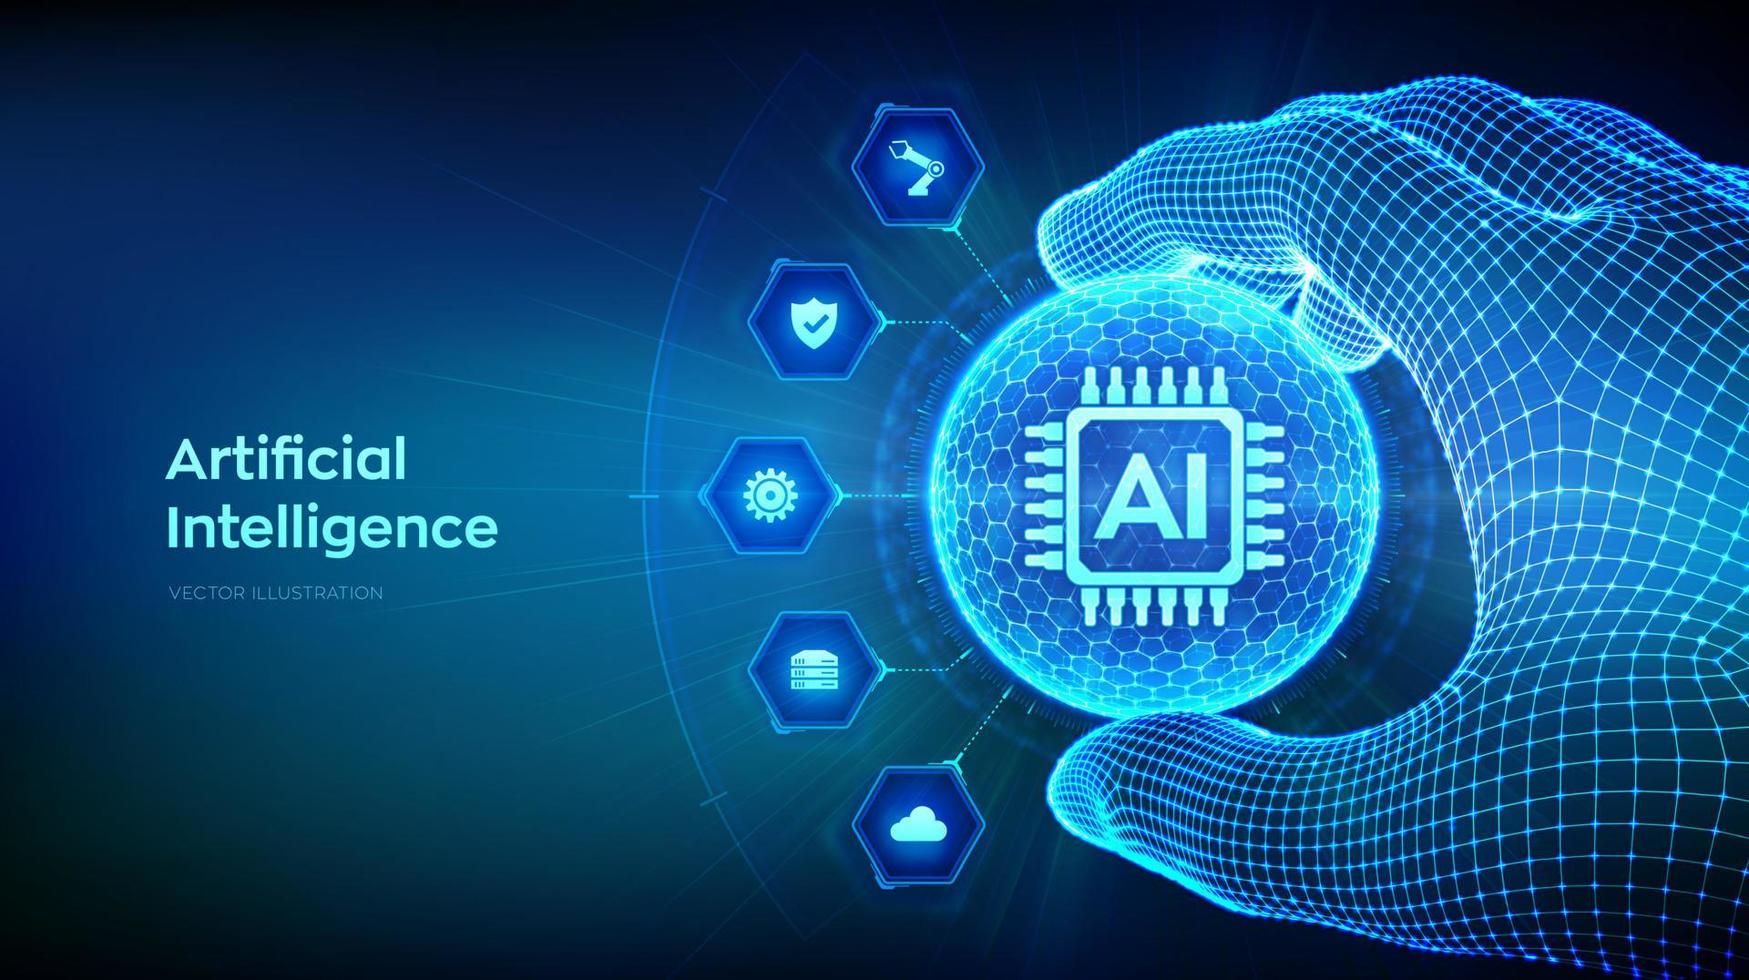 AI Across Industries fuels application of Artificial Intelligence technology across all industry verticals